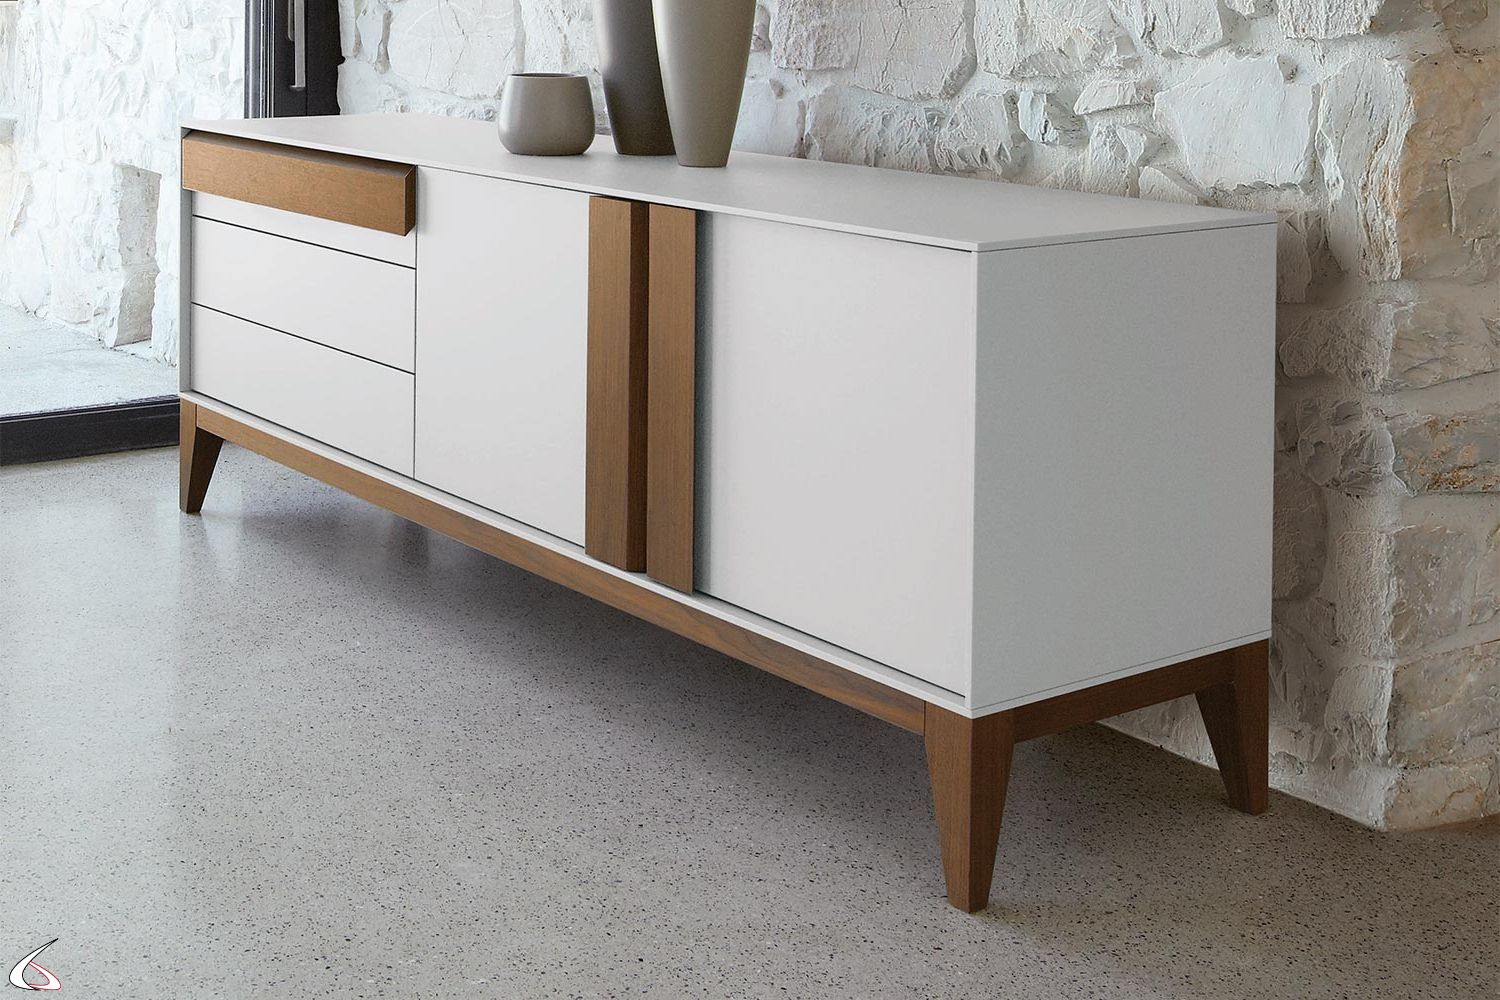 Design Sideboard In Wood On Olimpia Feet | Toparredi Pertaining To Gray Wooden Sideboards (View 16 of 20)